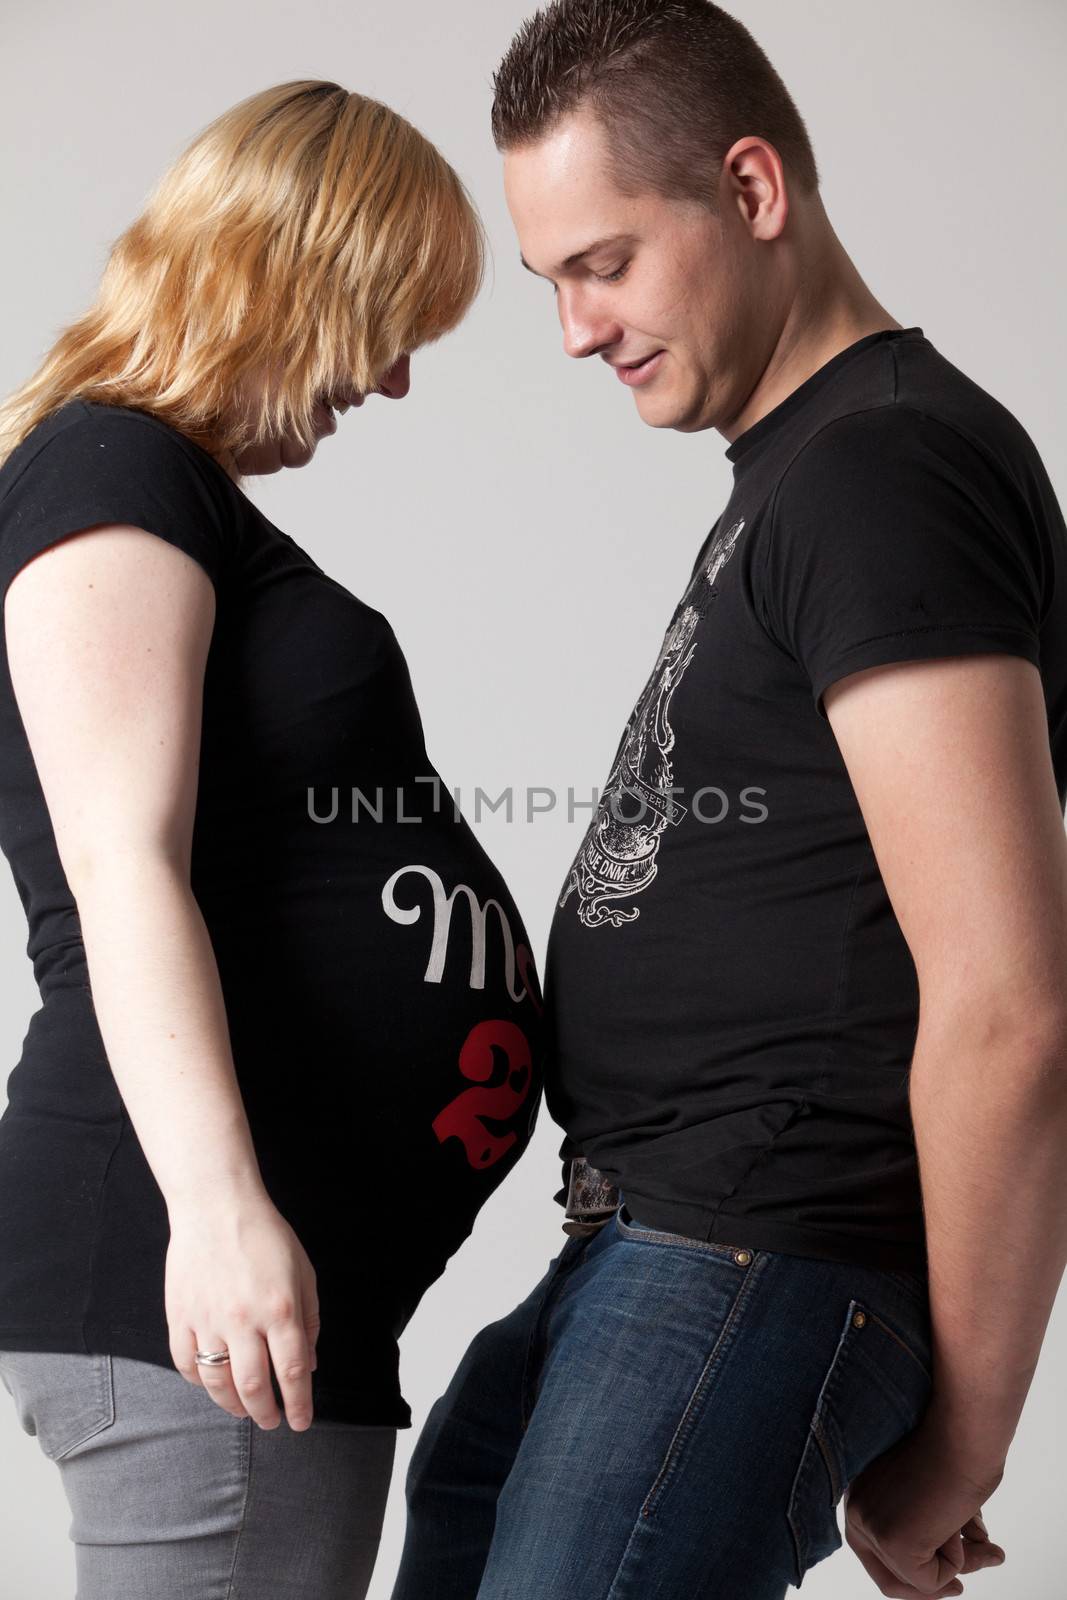 She is pregnant he's not by DNFStyle